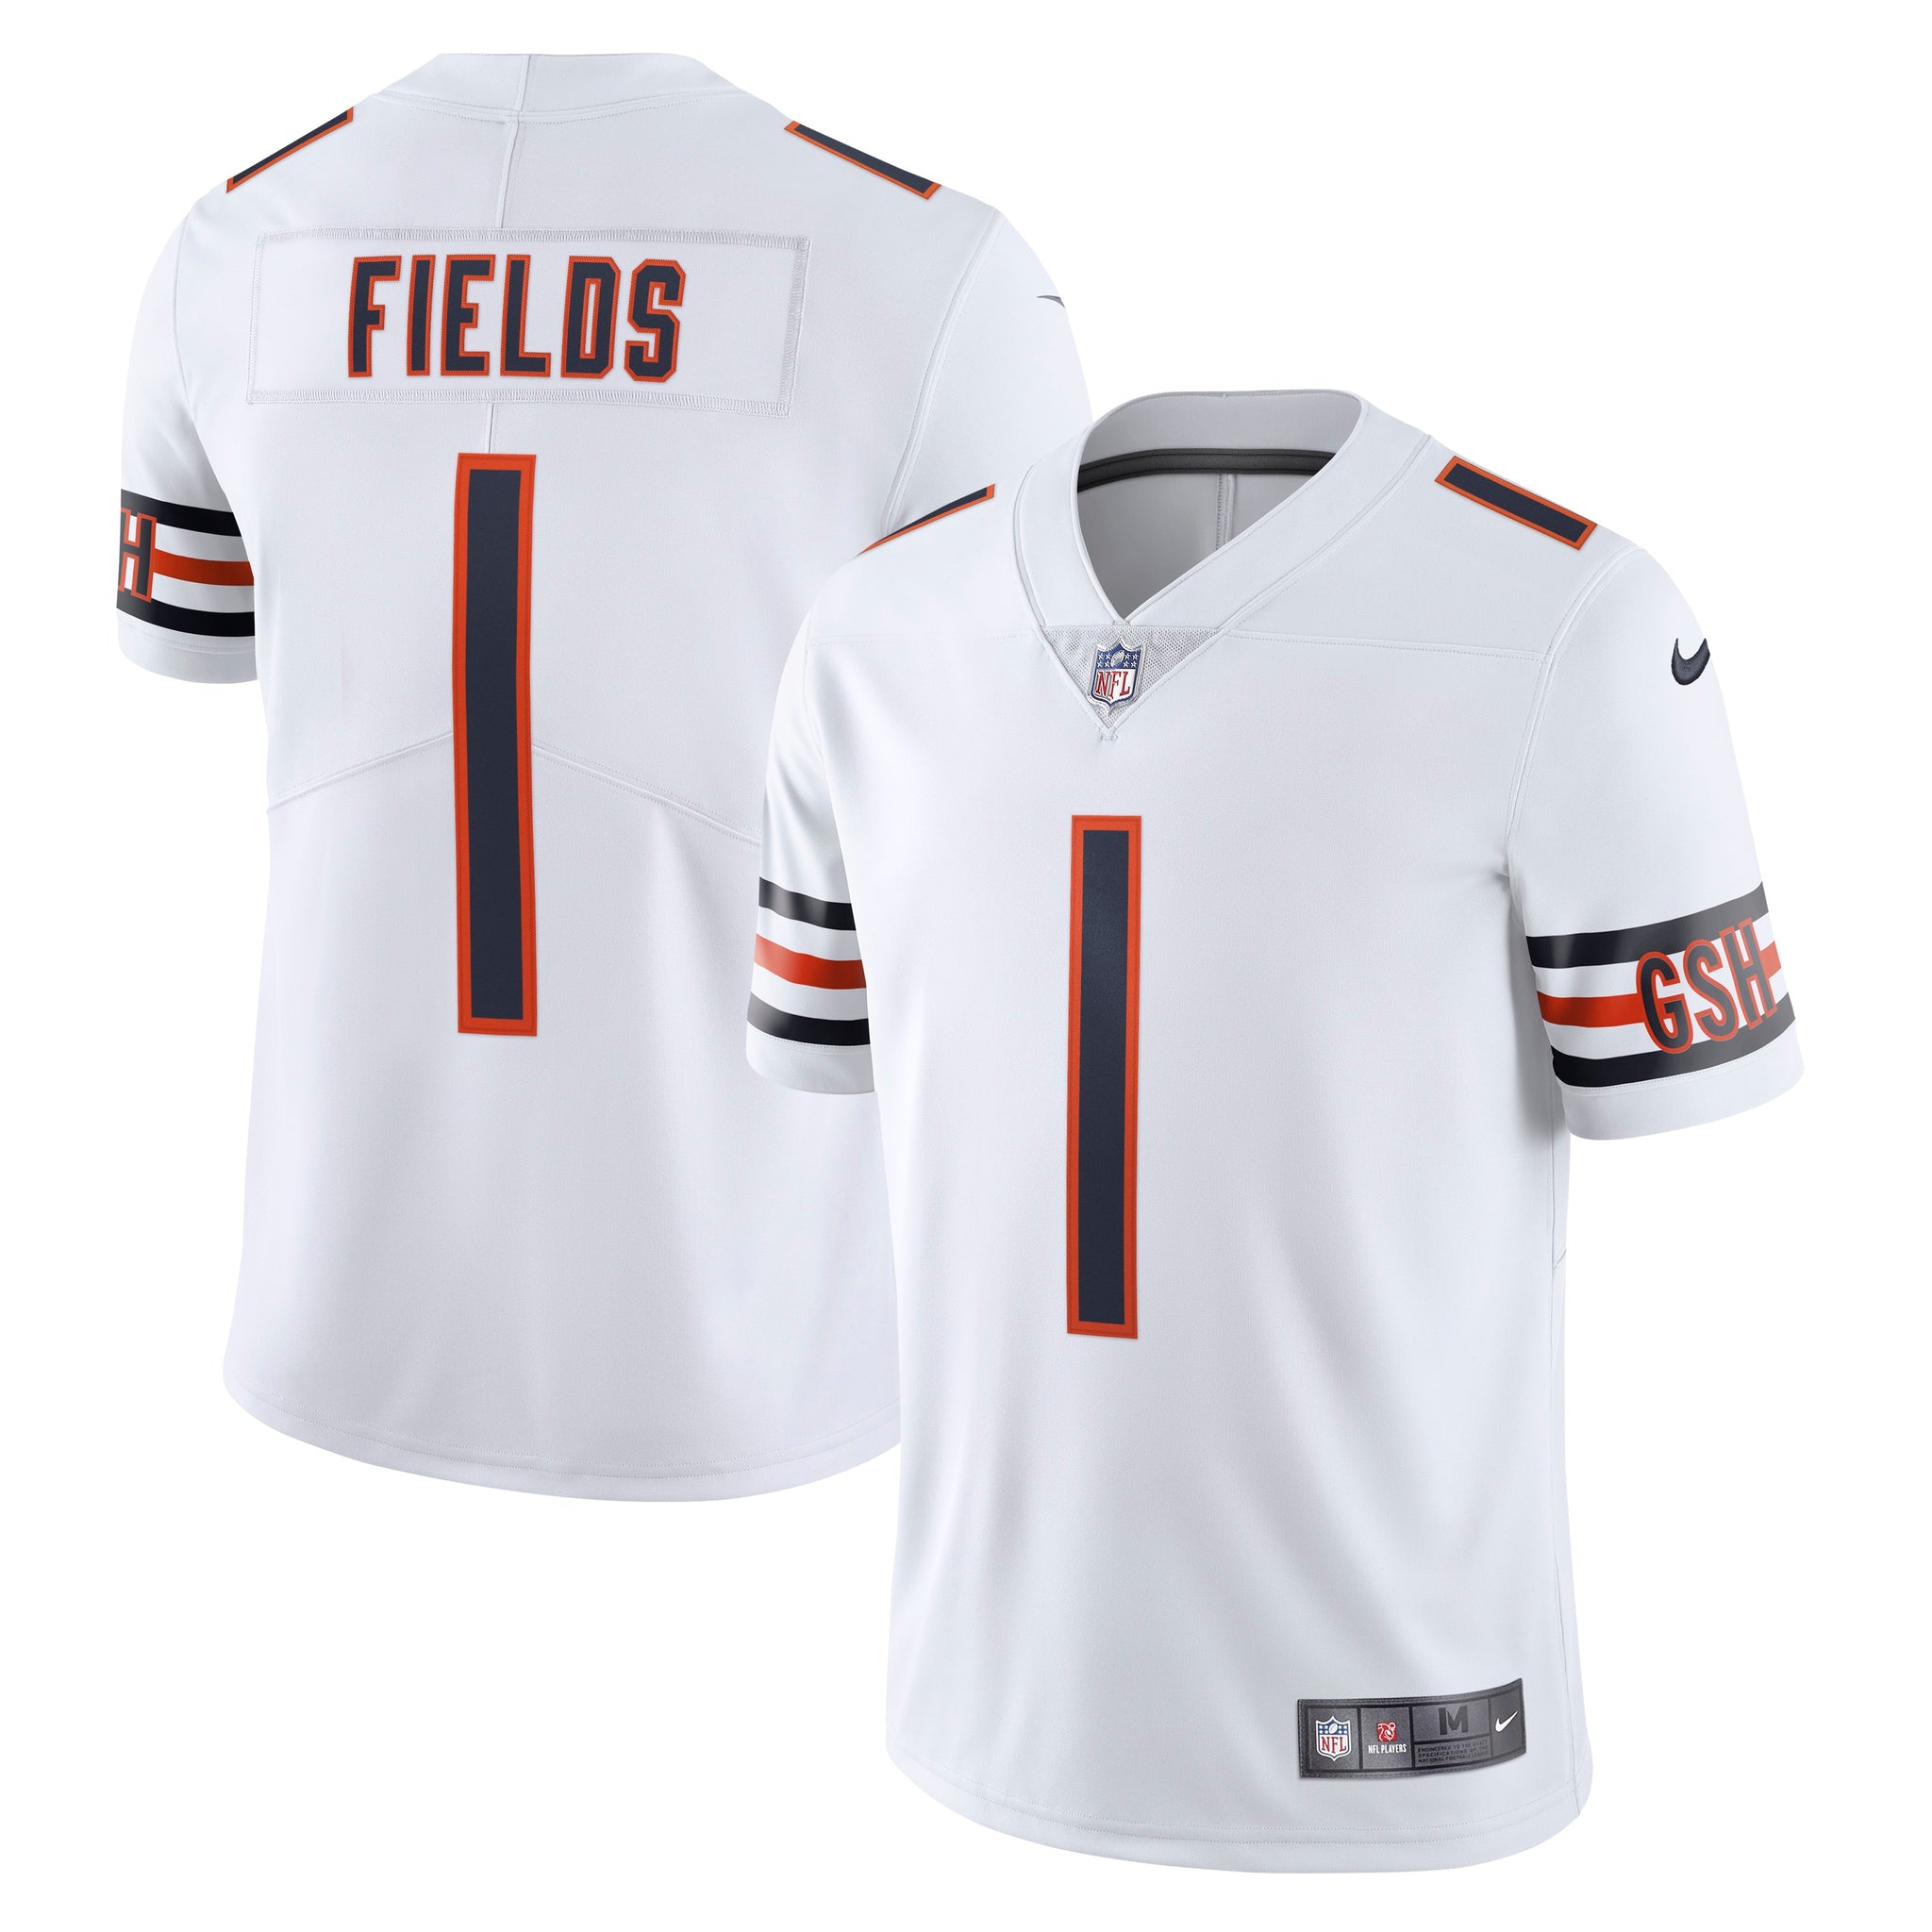 Men's Nike Justin Fields White Chicago Bears Vapor Limited Jersey Size: Small